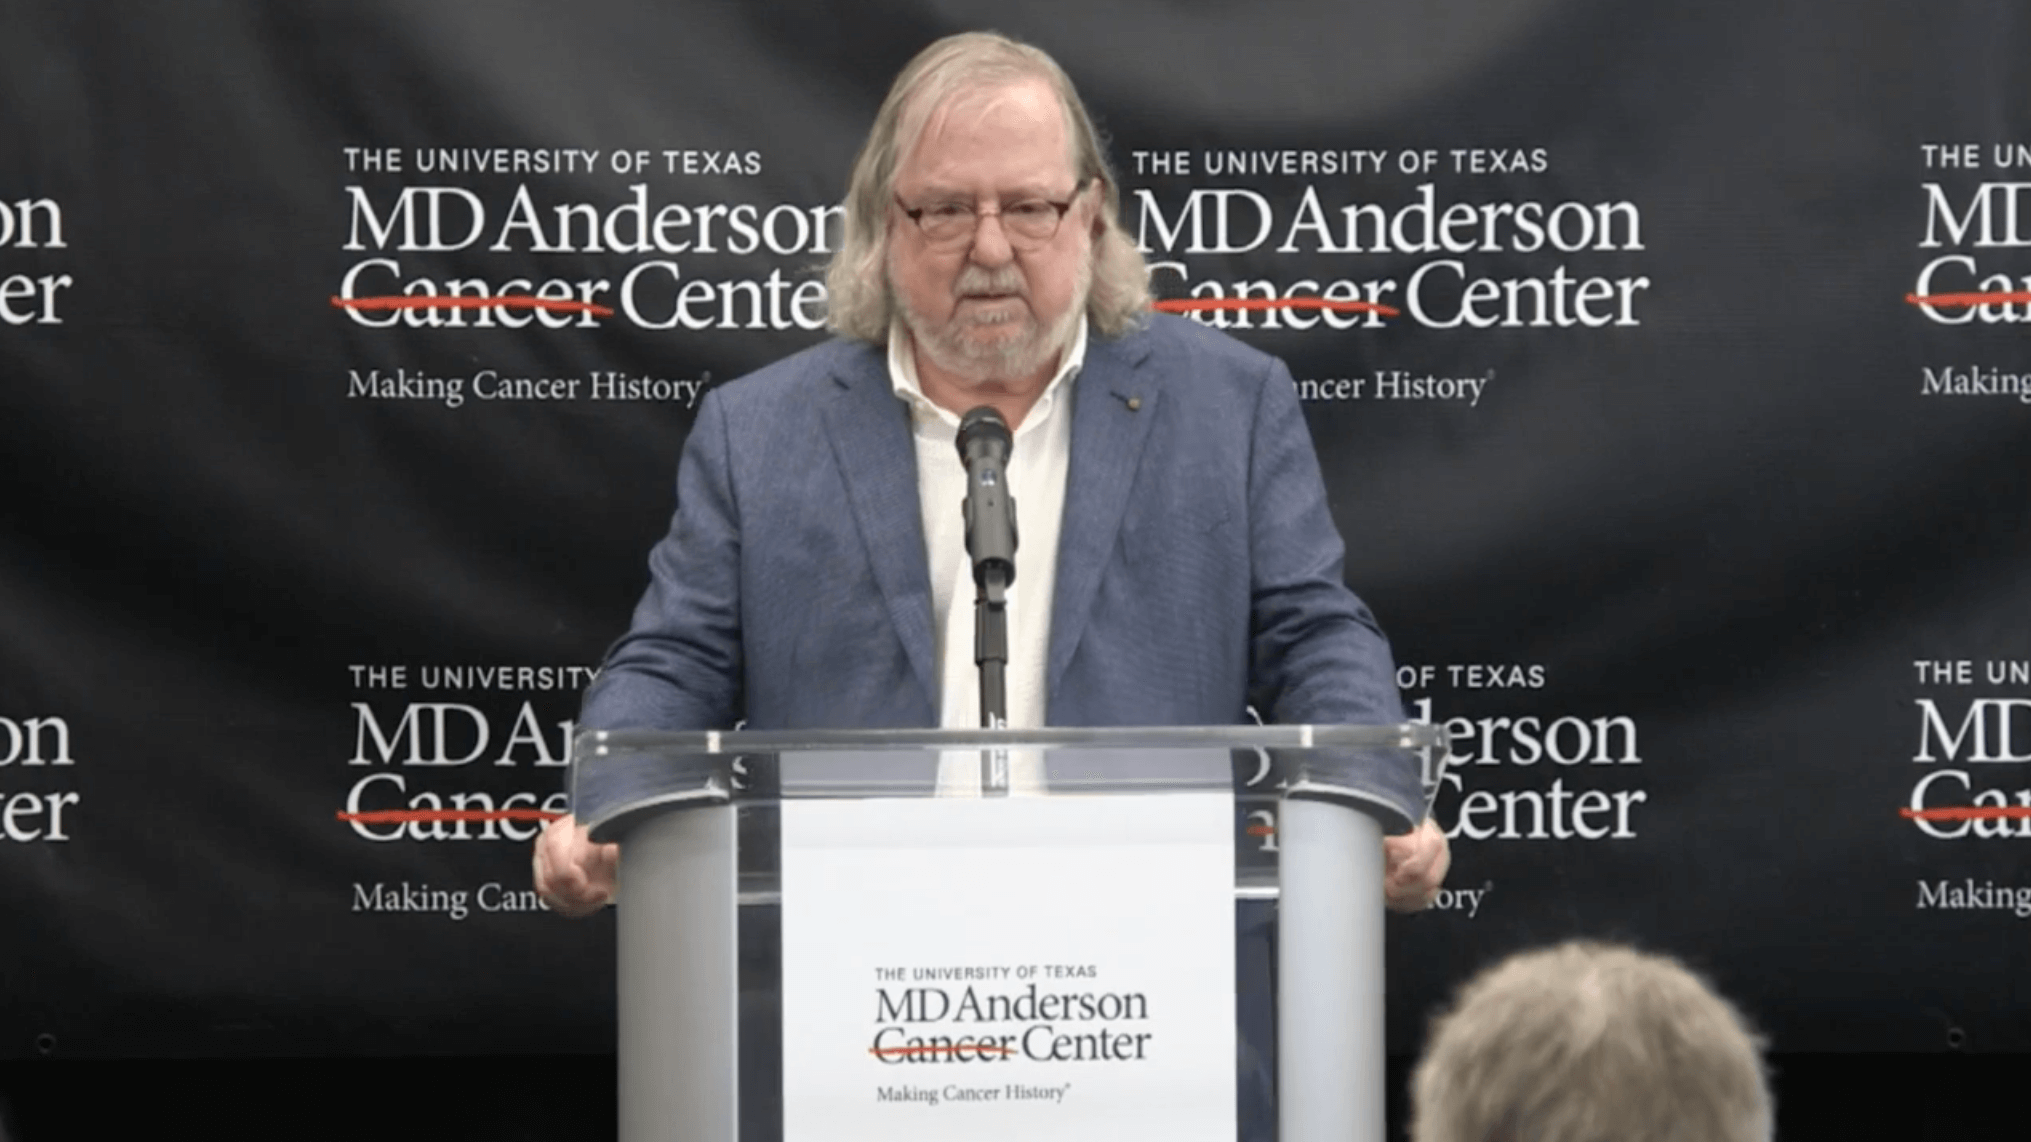 MD Anderson immunologist James P. Allison, Ph.D., reacts to receiving the 2018 Nobel Prize in Physiology or Medicine during a news conference on Oct. 1, 2018 in New York City where he was attending a cancer immunotherapy conference. (MD Anderson live feed)